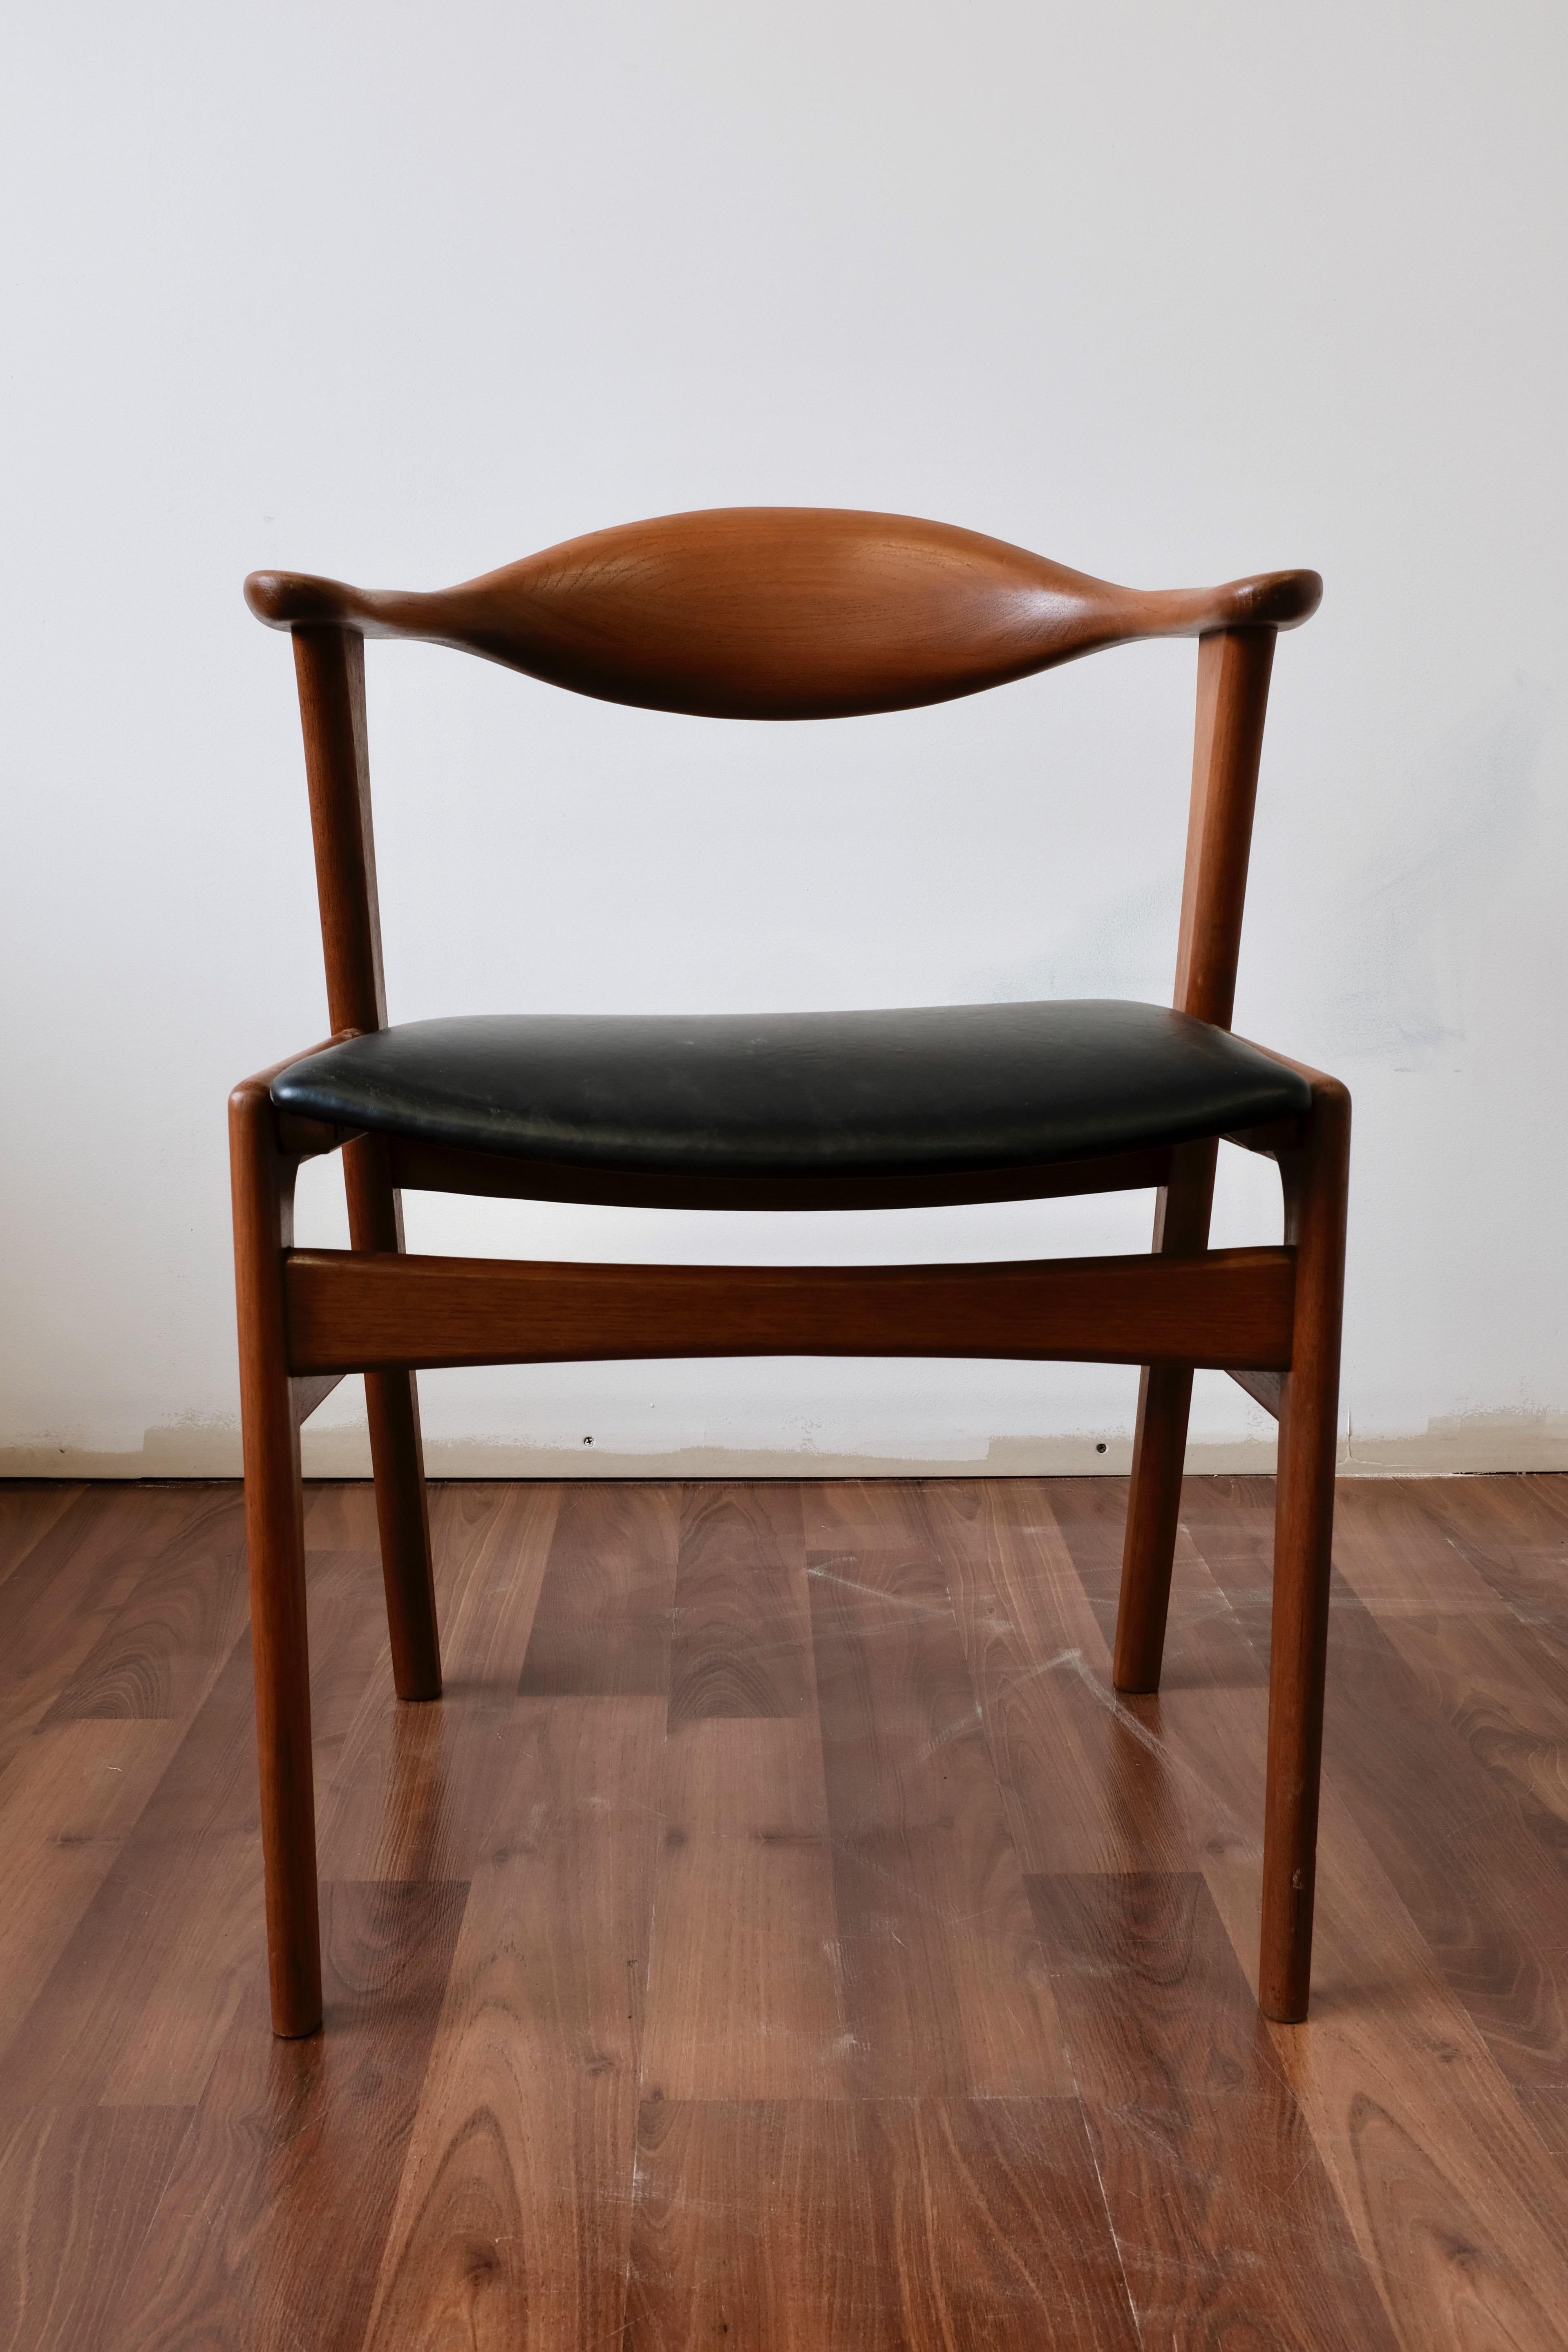 Teak dining or side chair designed by Erik Kirkegaard and made in Denmark by Hong Stolfabrik.

The chair frame is solid teak and features a distinctive sculptural backrest that curves forward to provide support for the elbows. The frame has been